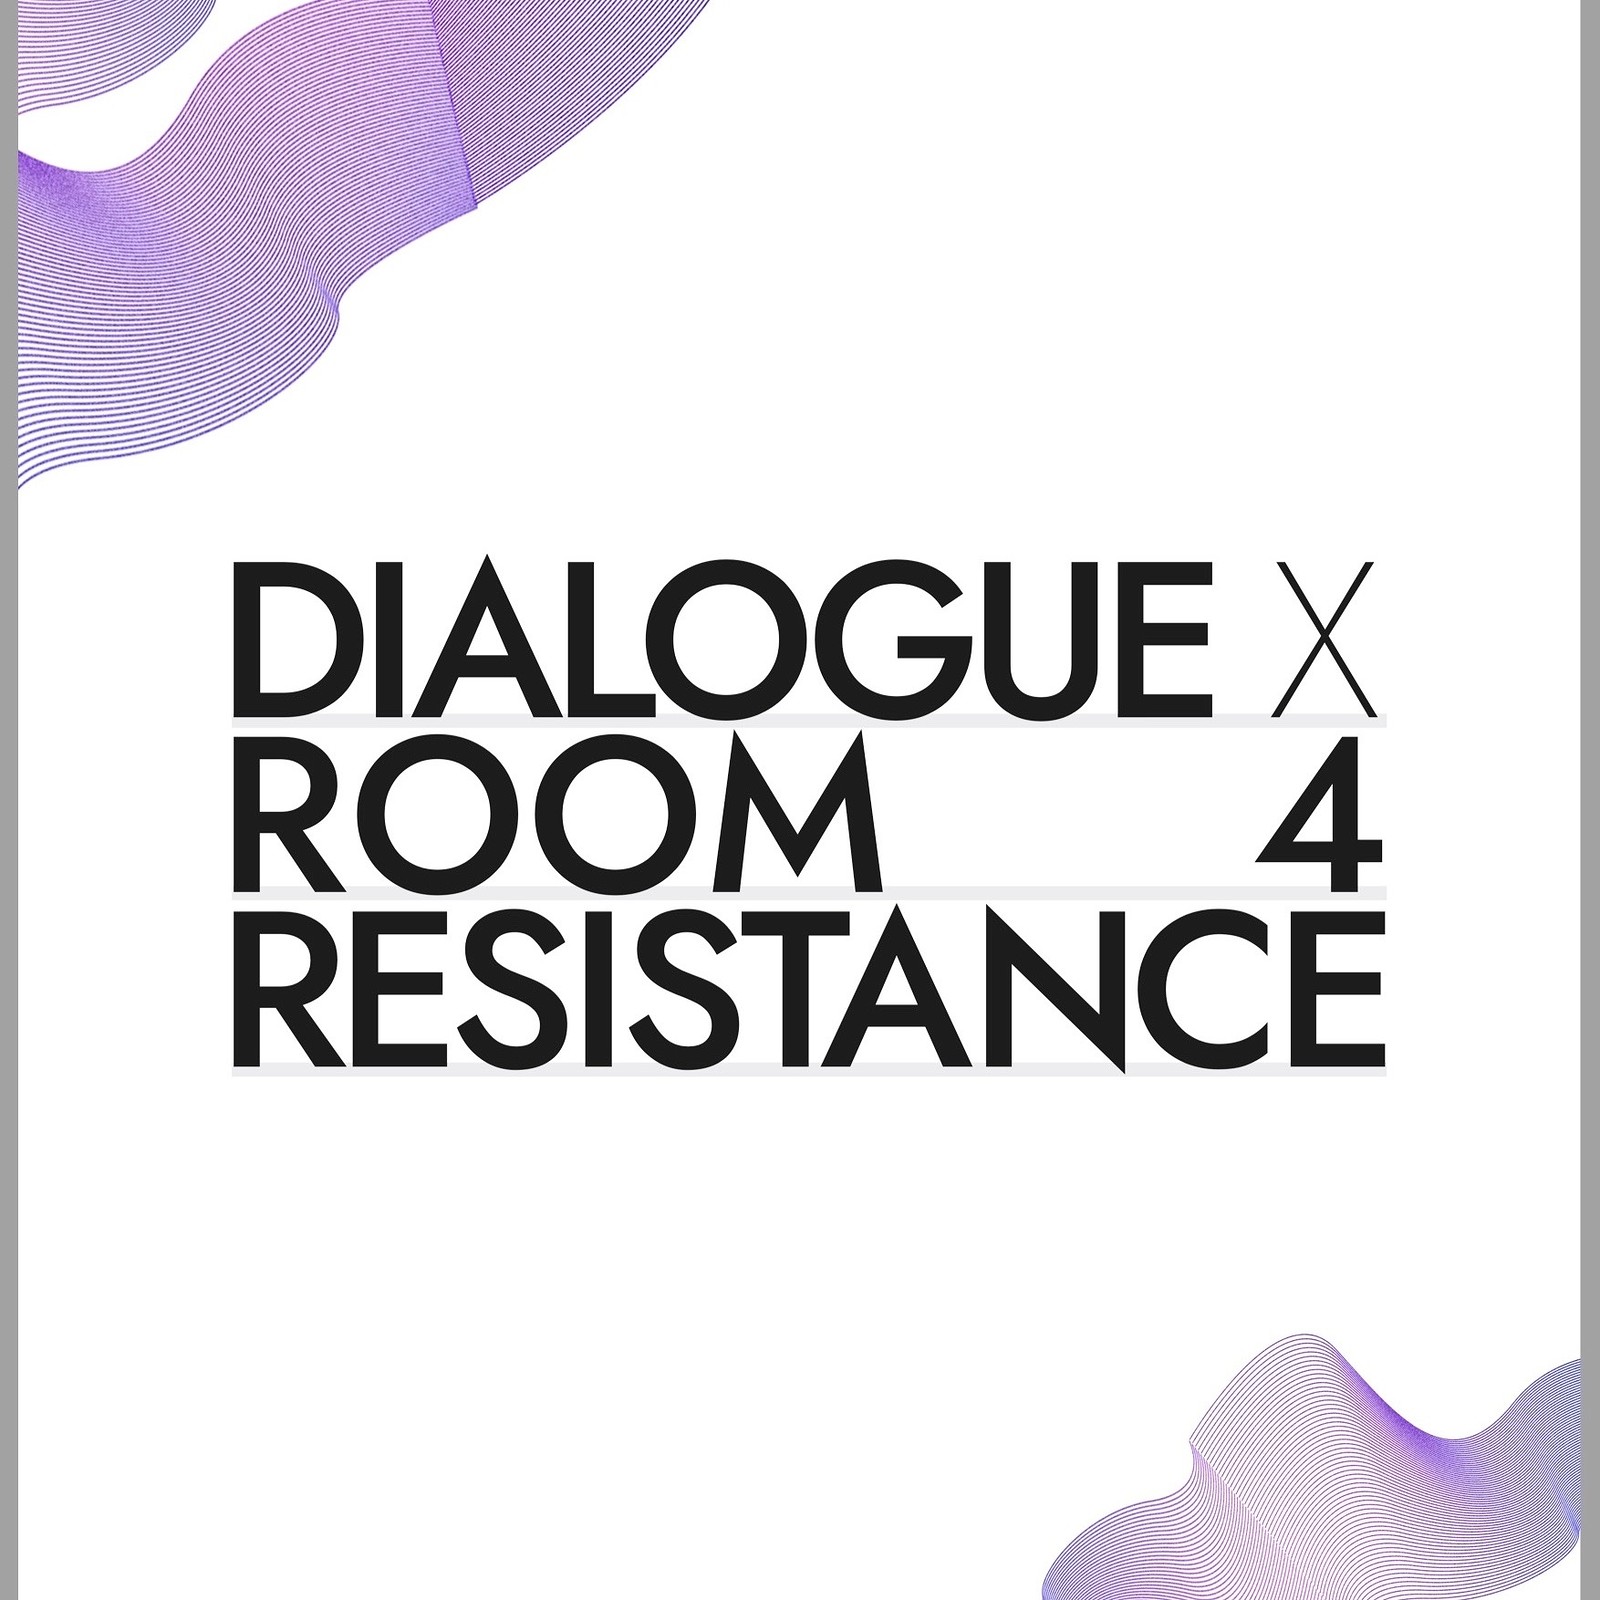 Dialogue X Room 4 Resistance at Dare to Club